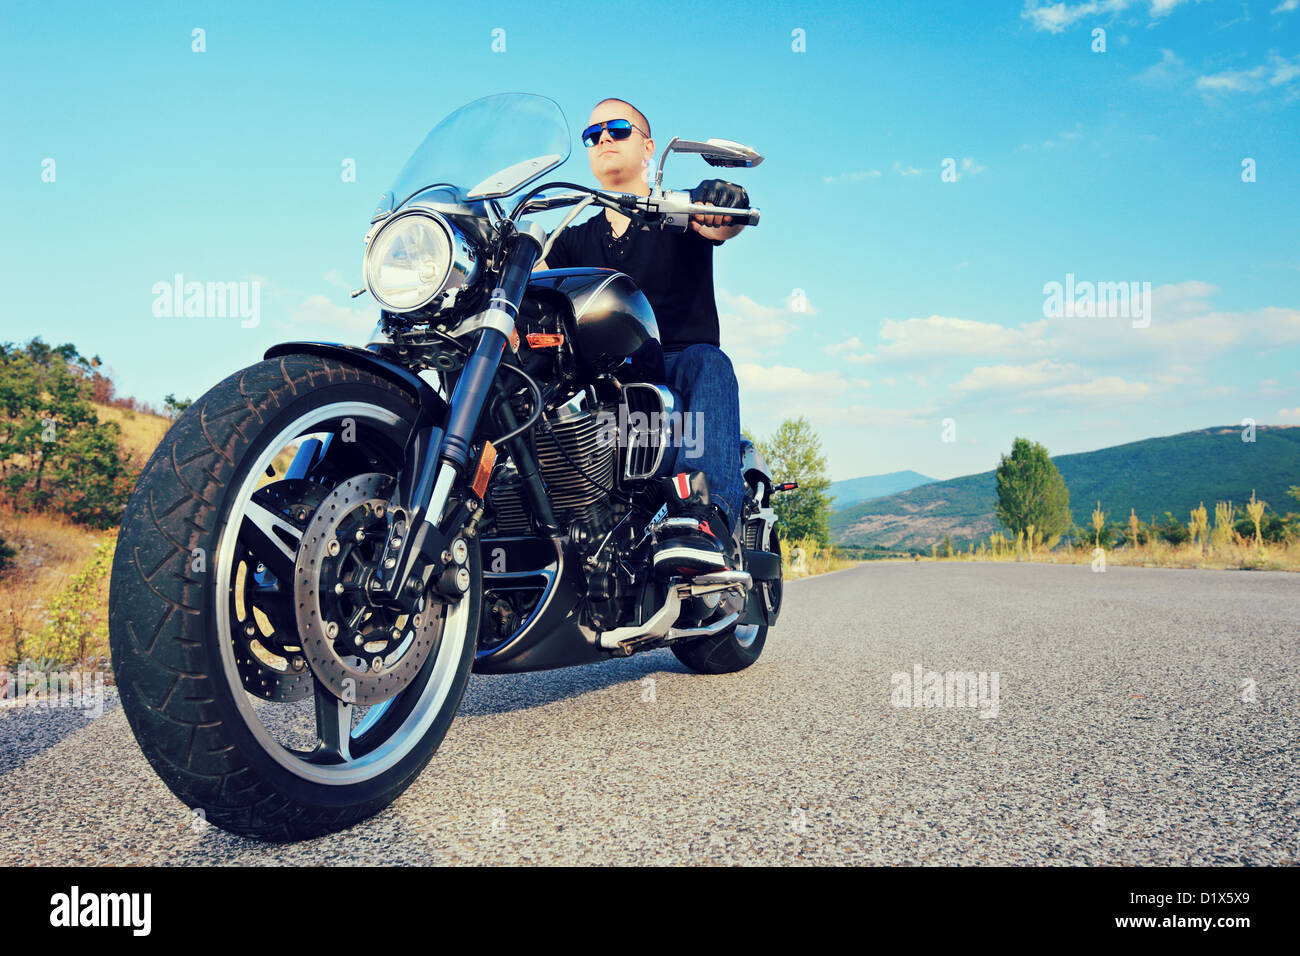 Young biker posing on a customized motorcycle on an open road Stock Photo